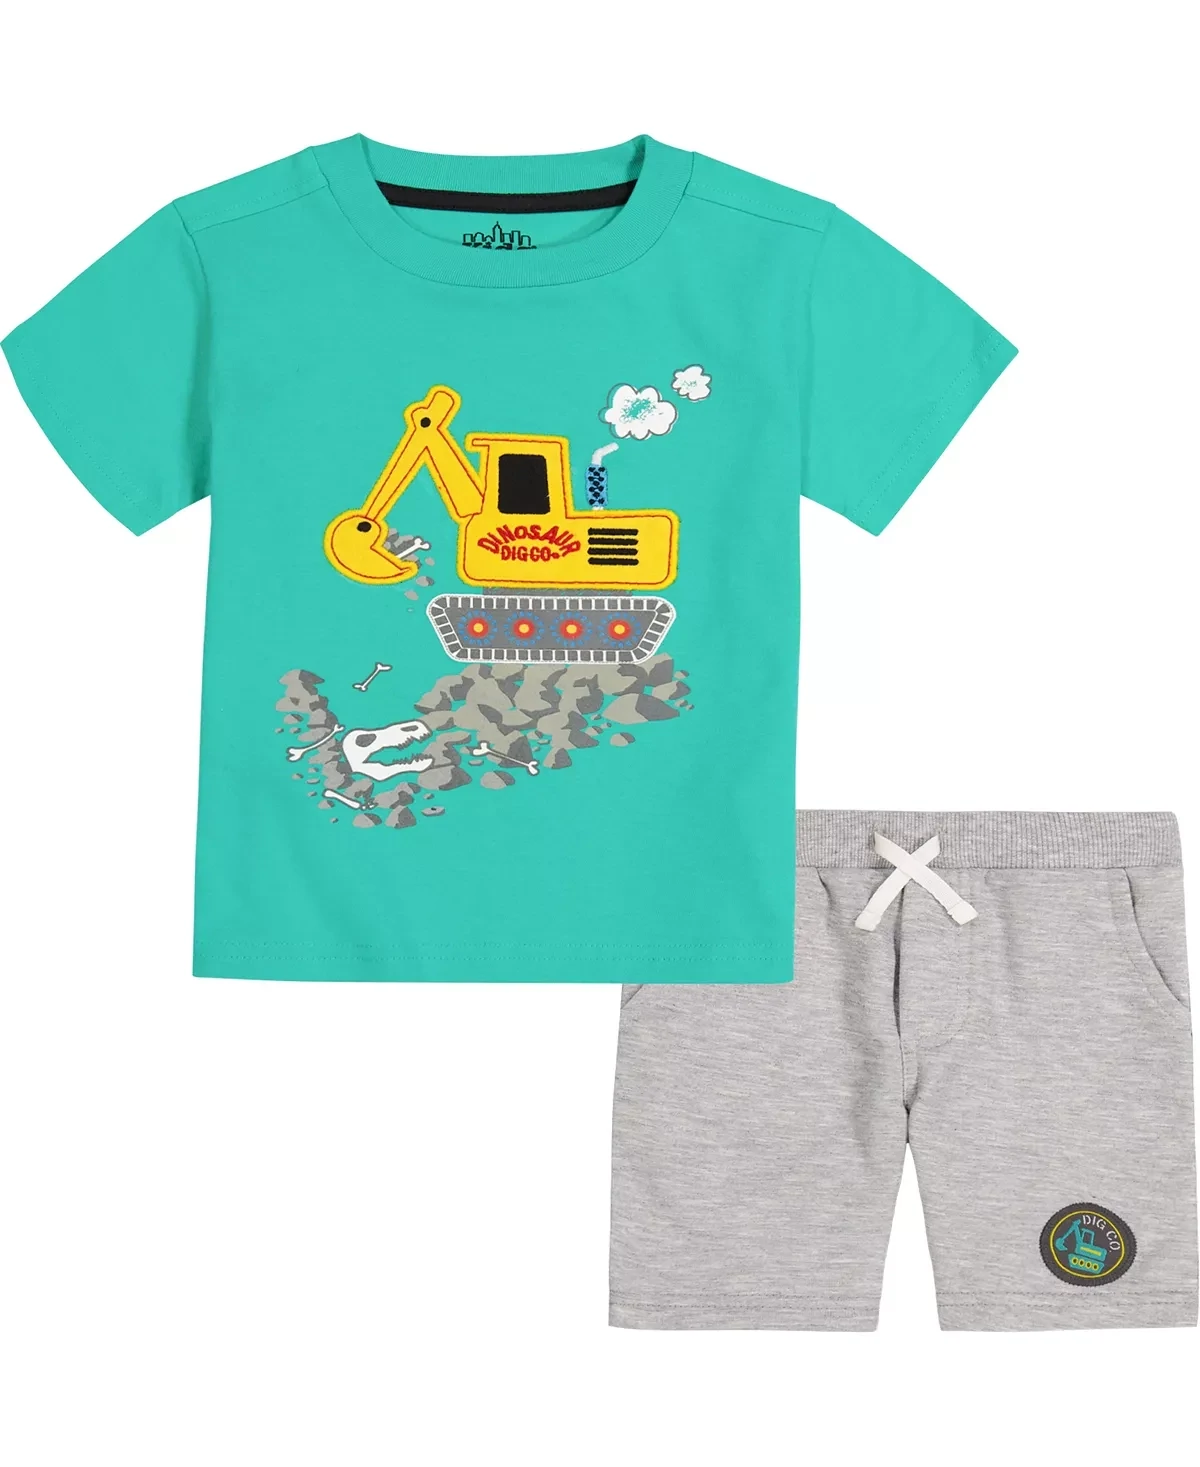 Kids Headquarters Little Boys 2 Piece Short Sleeve Applique T-shirt and French Terry Shorts Set - Green, Size 5